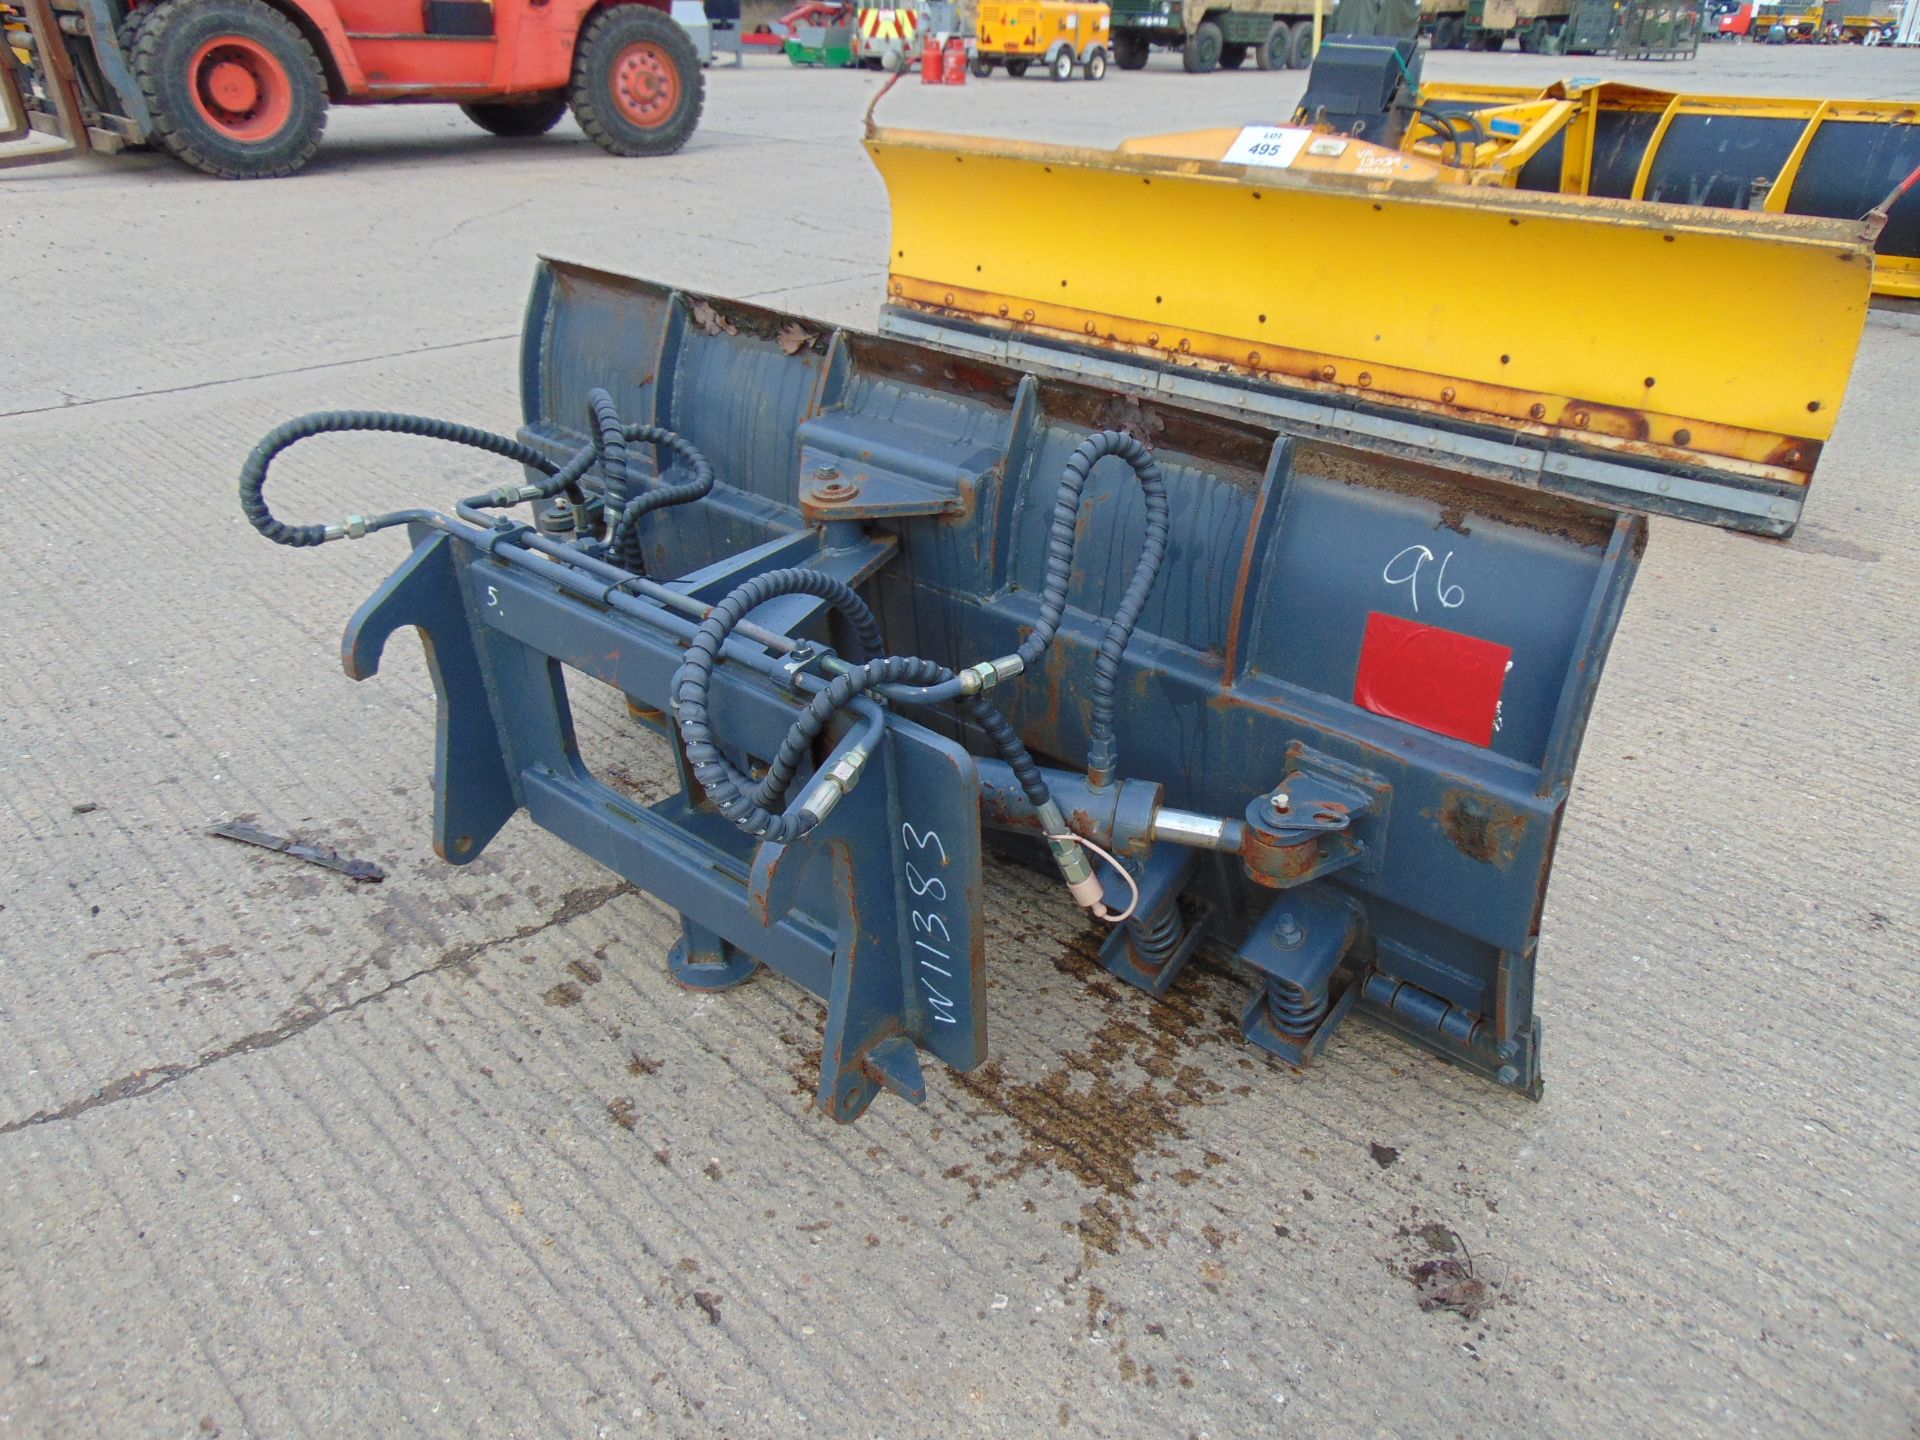 6' Hydraulic Snow Plough Blade for Telehandler, Forklift, Tractor Etc - Image 4 of 8